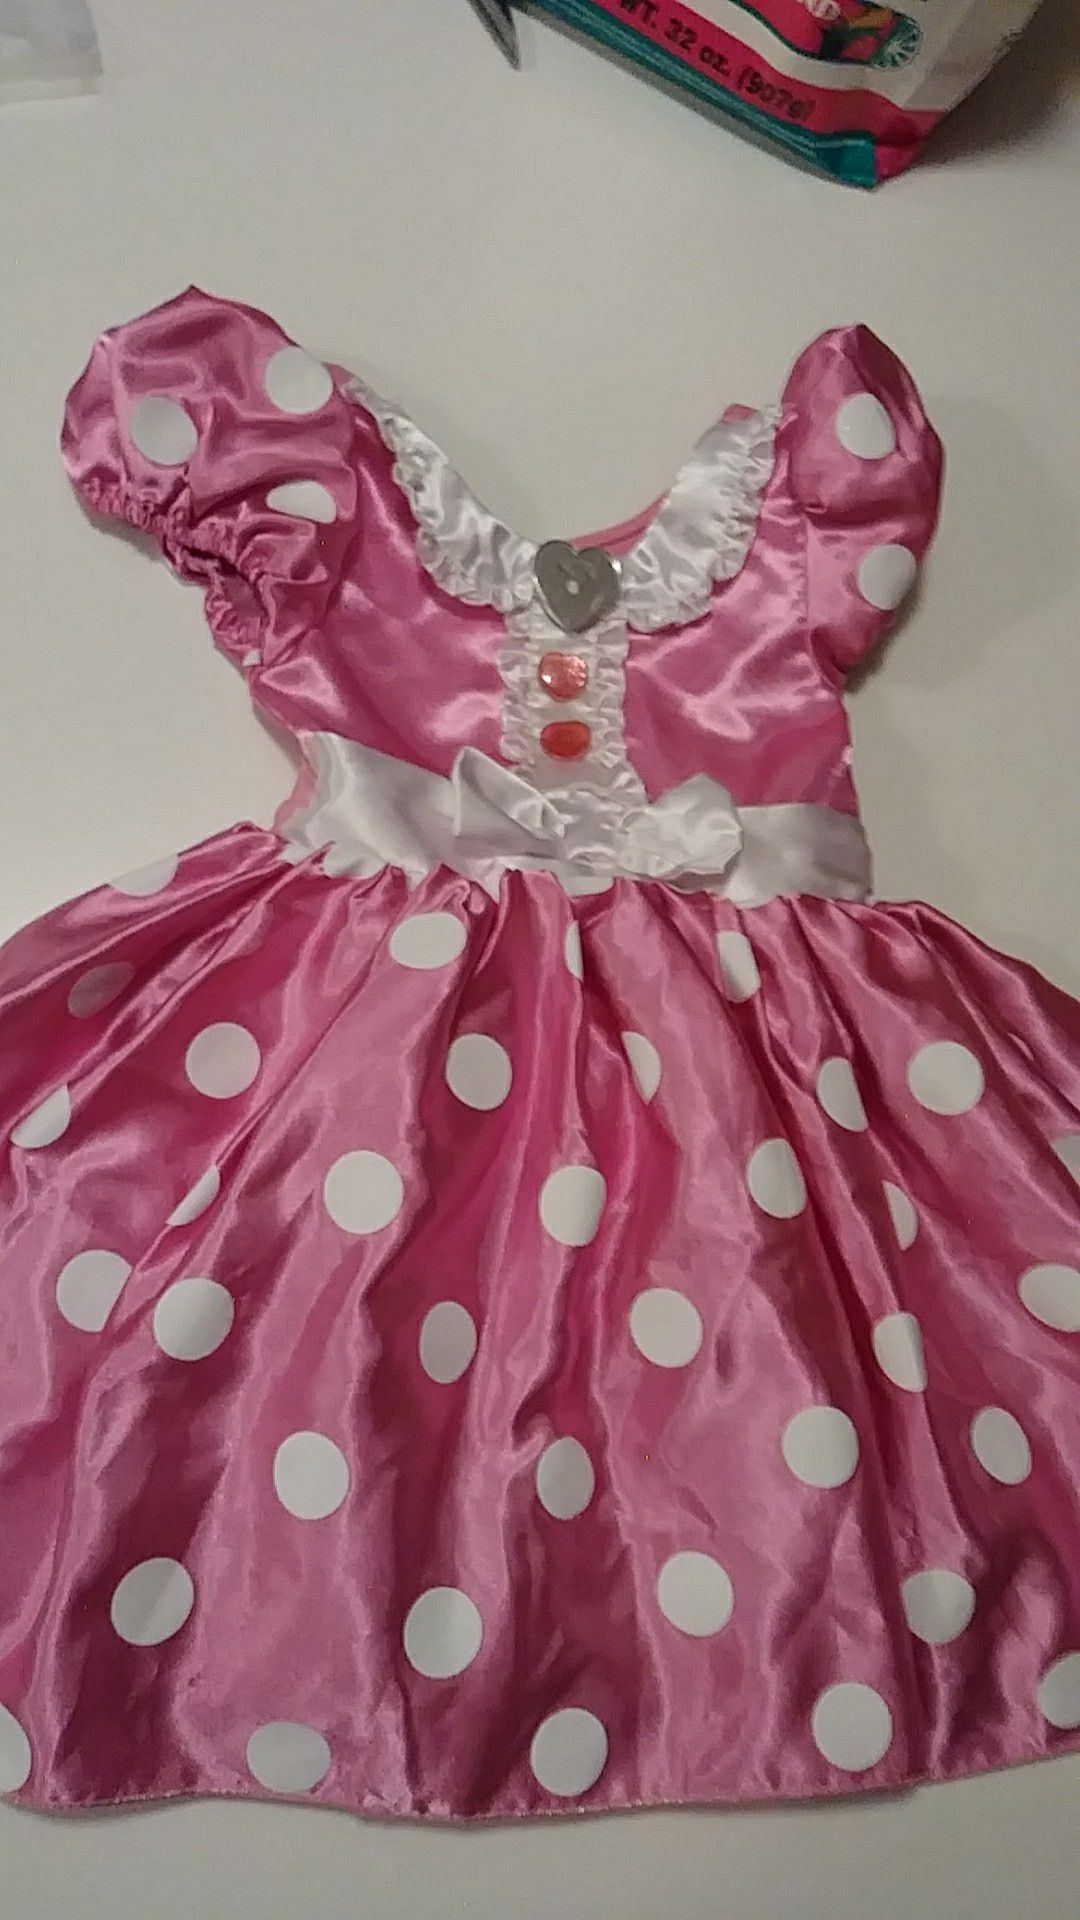 Minnie mouse dress size 2 toddler